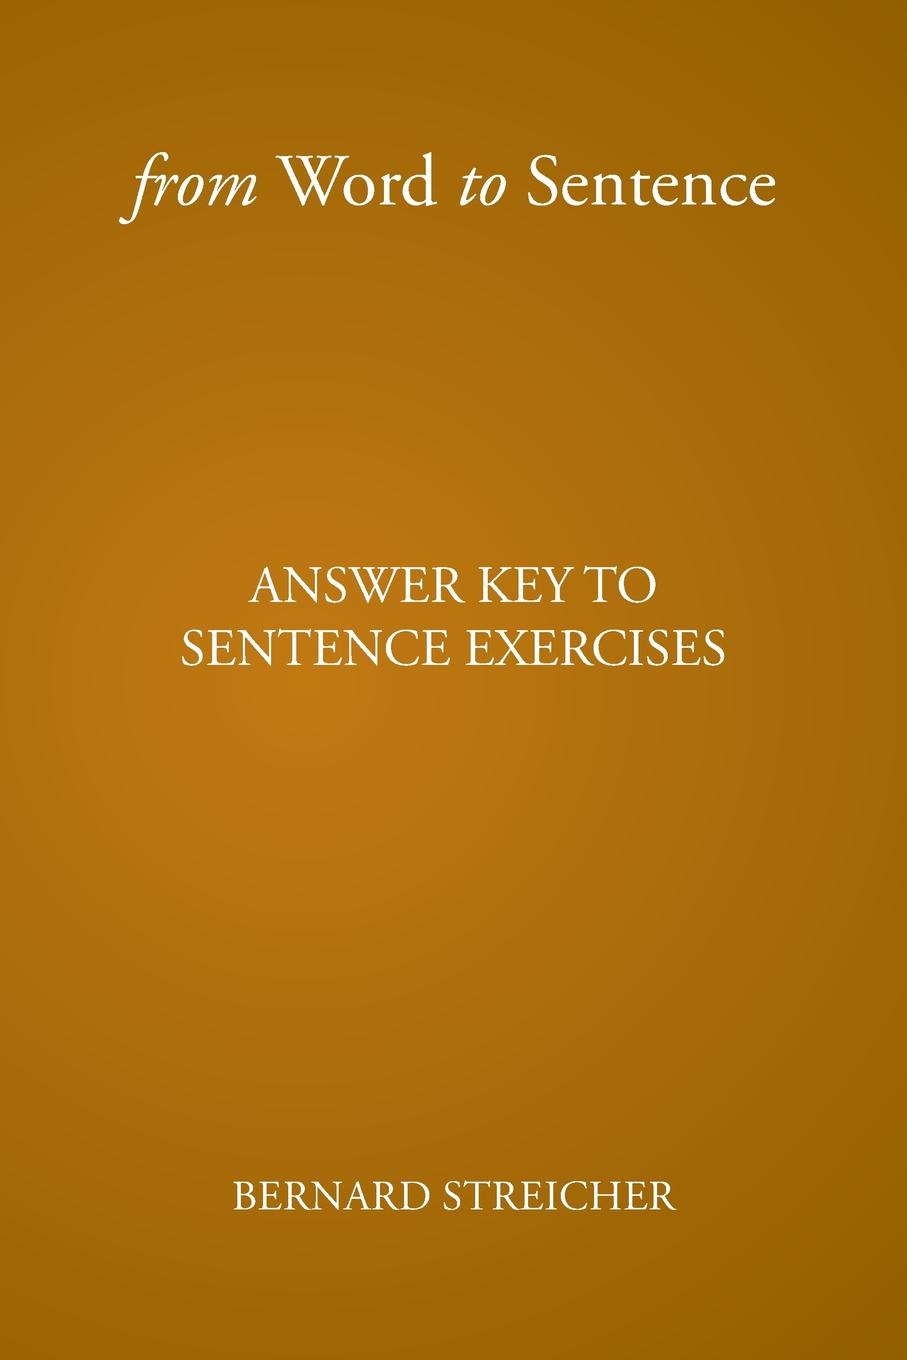 From Word to Sentence. ANSWER KEY TO SENTENCE EXERCISES